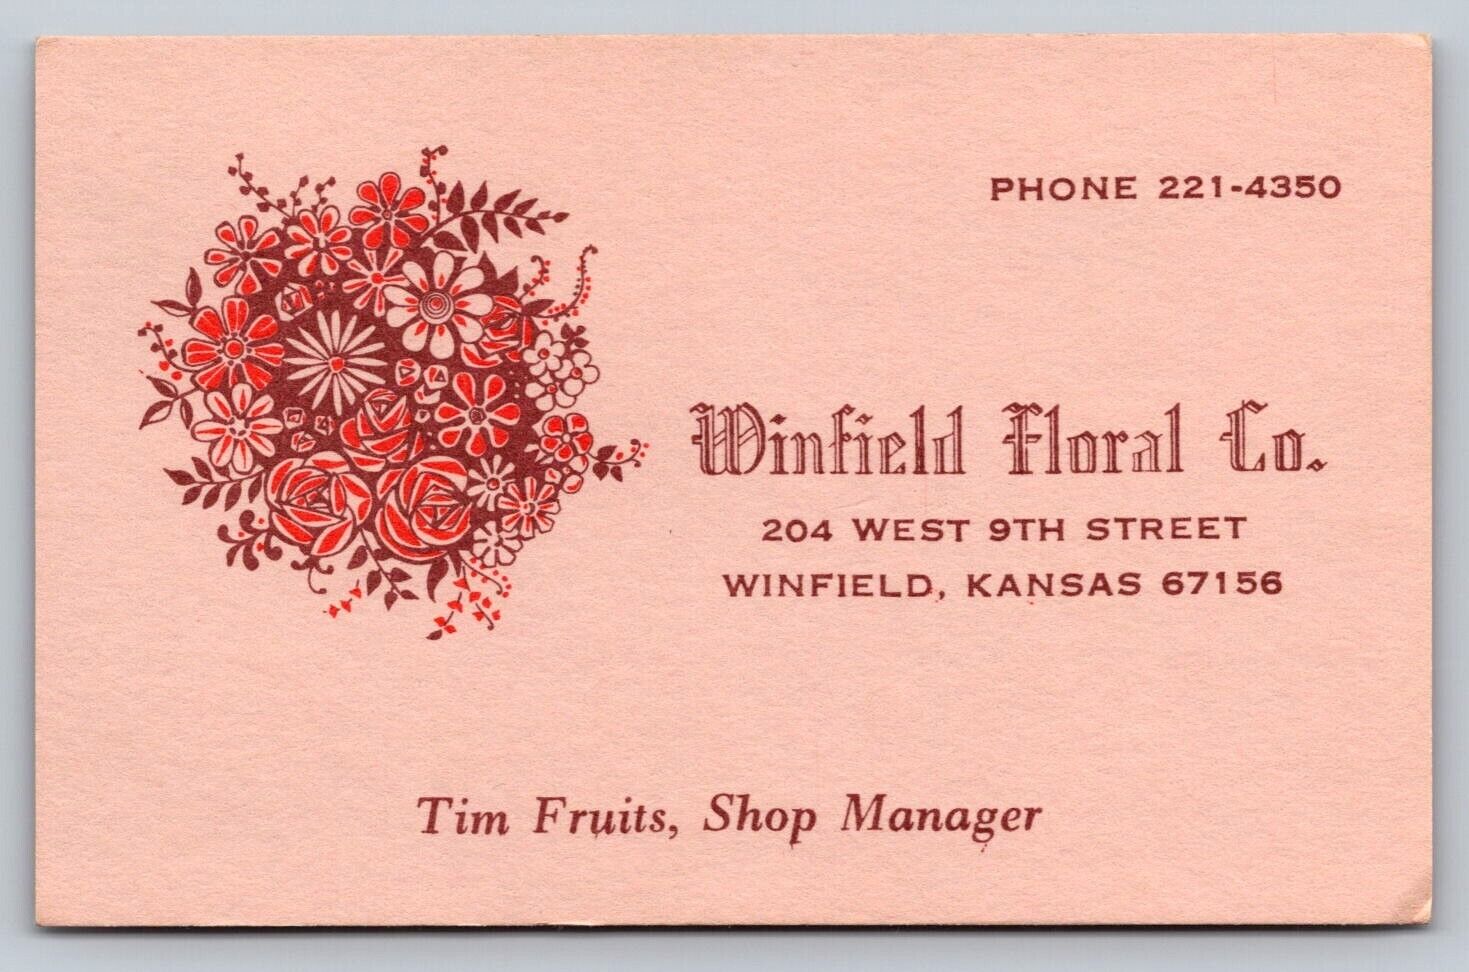 Vintage Business Card Winfield Floral Company Winfield Kansas